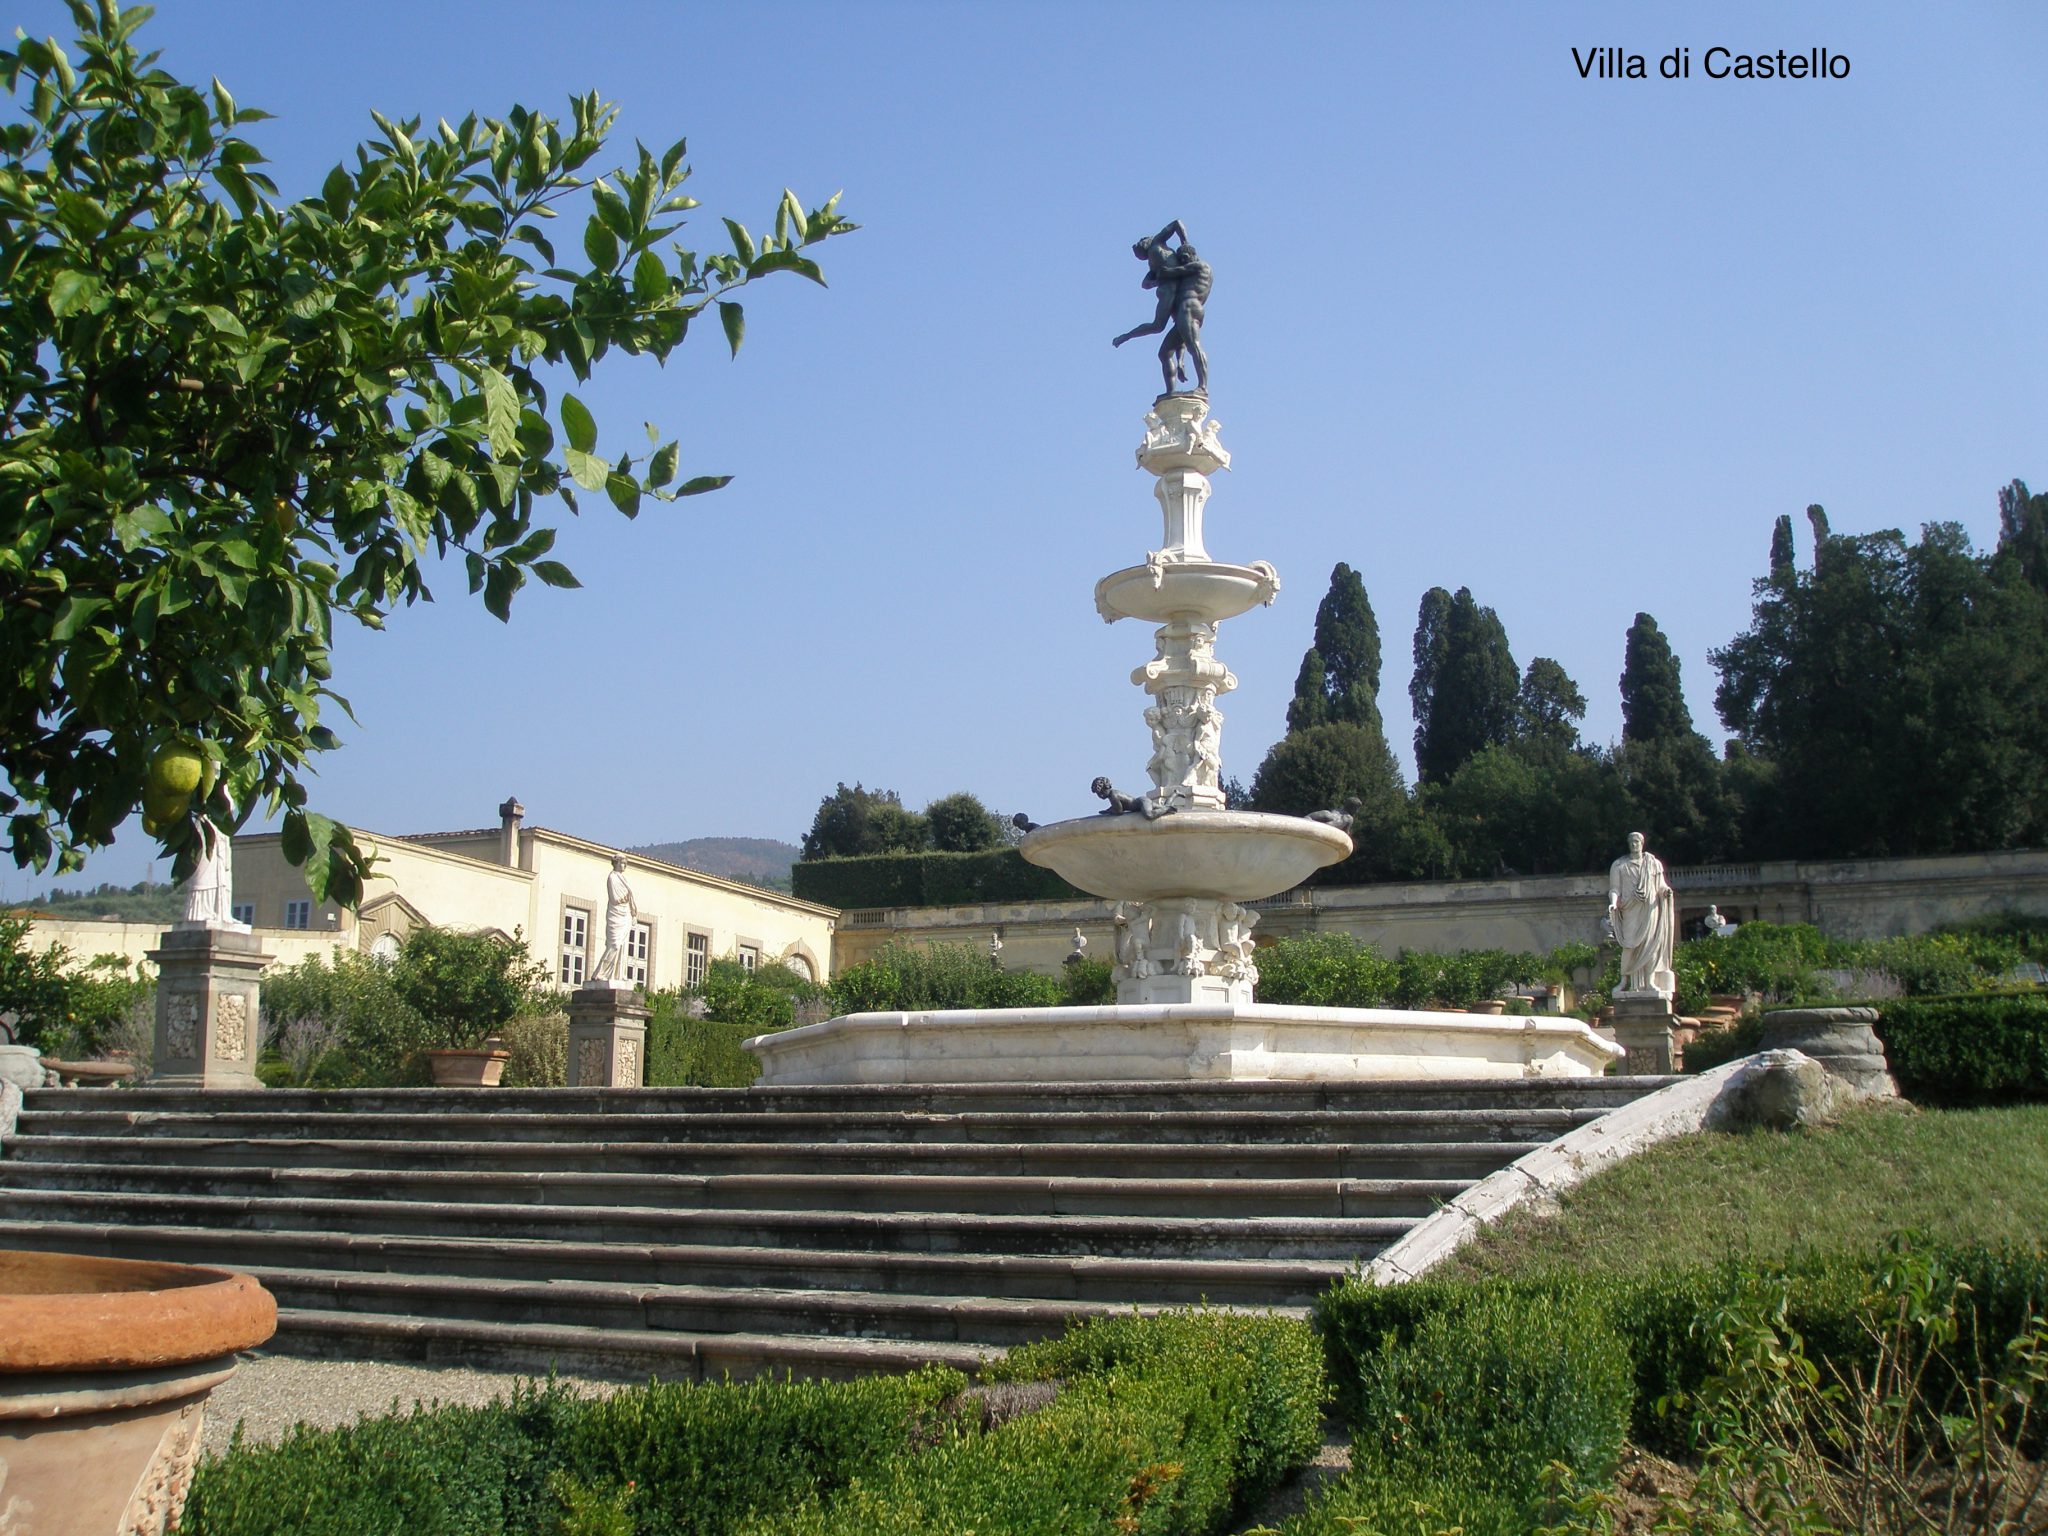 At Villa di Castello, this large fountain symbolizes one of Florence's nearby mountains.